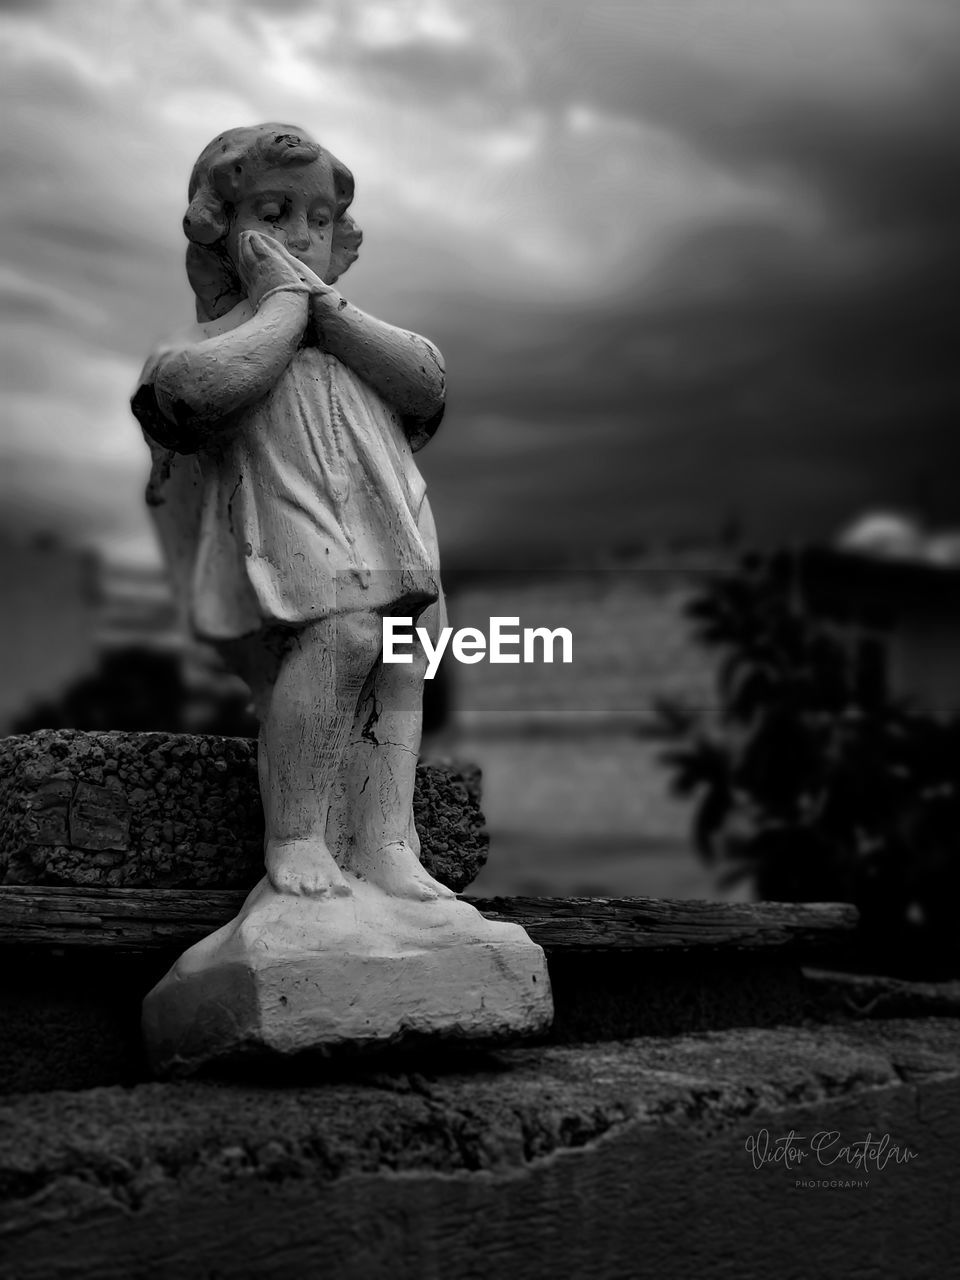 black and white, black, monochrome, statue, cloud, sculpture, monochrome photography, sky, white, darkness, human representation, monument, representation, nature, person, child, religion, craft, childhood, creativity, sadness, architecture, stone material, outdoors, sitting, human face, spirituality, history, male likeness